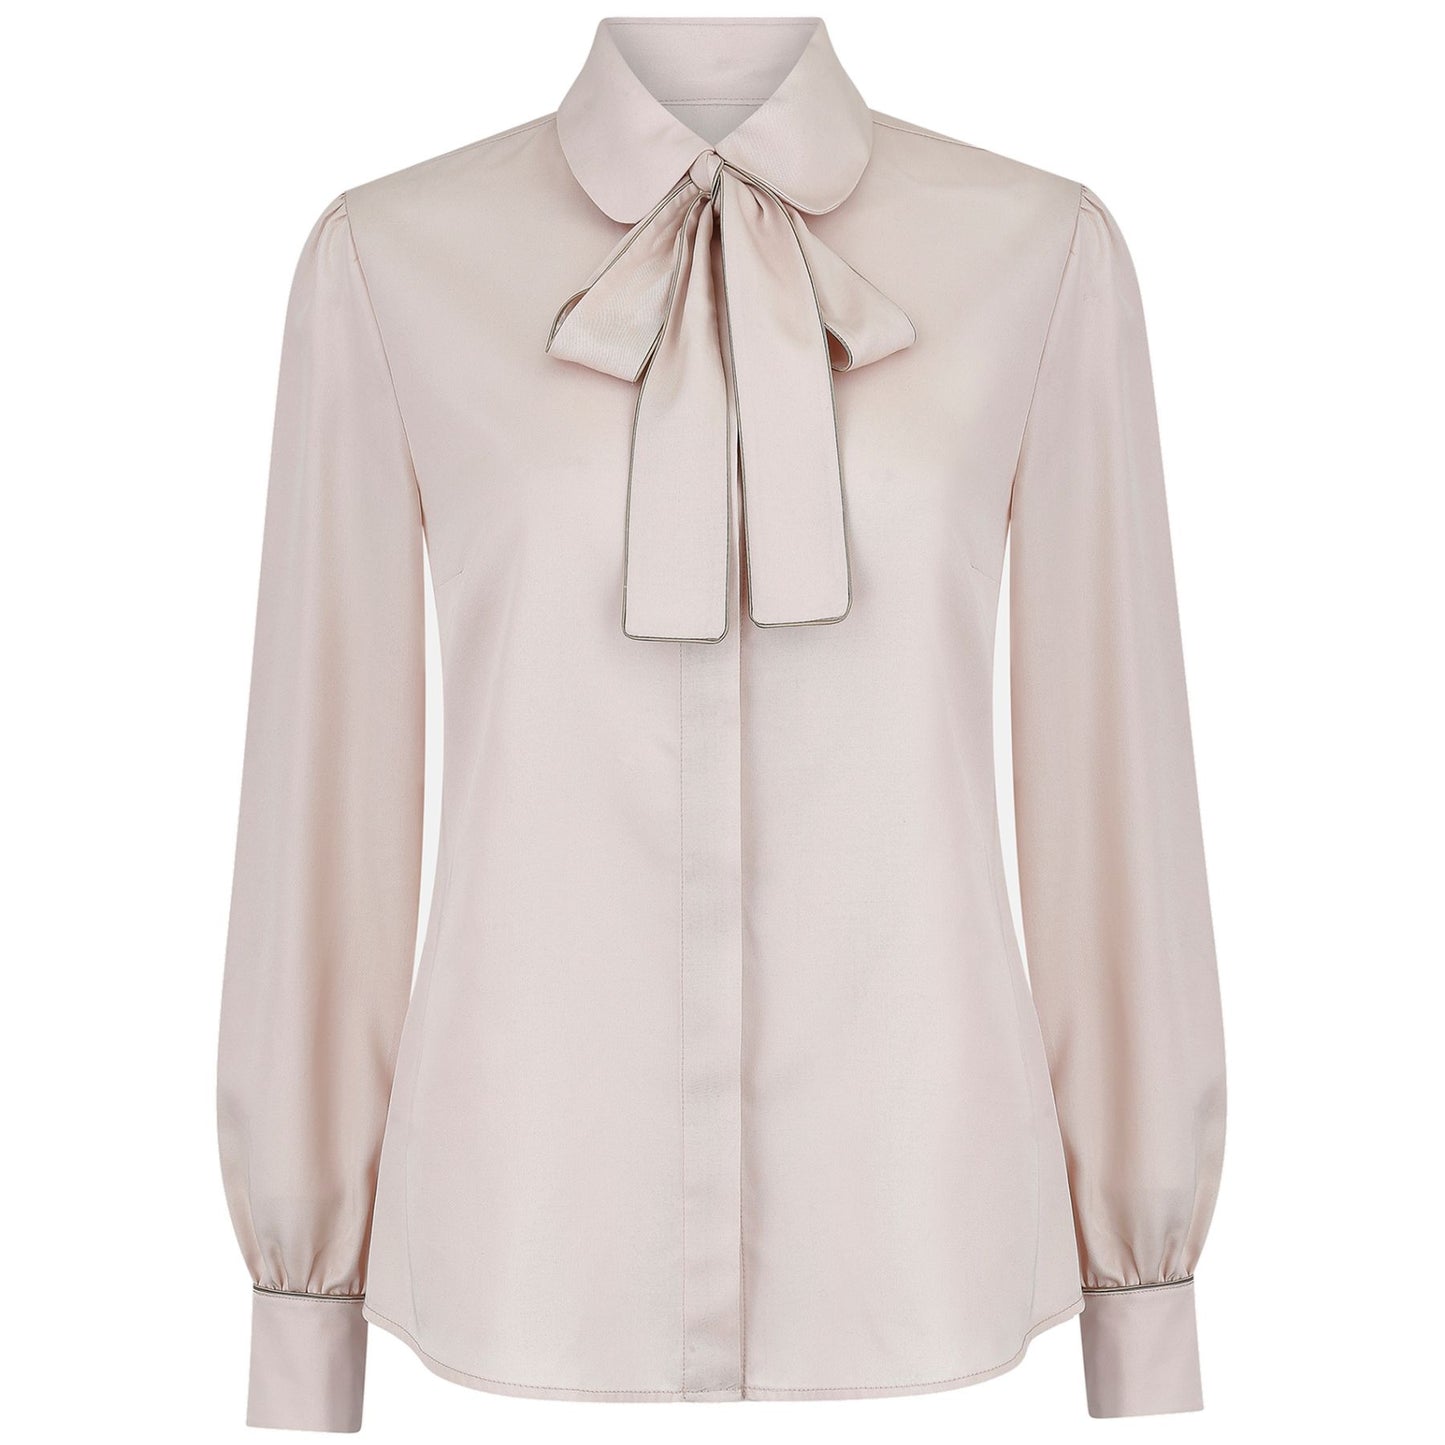 Bowtie Blouse in Blush Pink